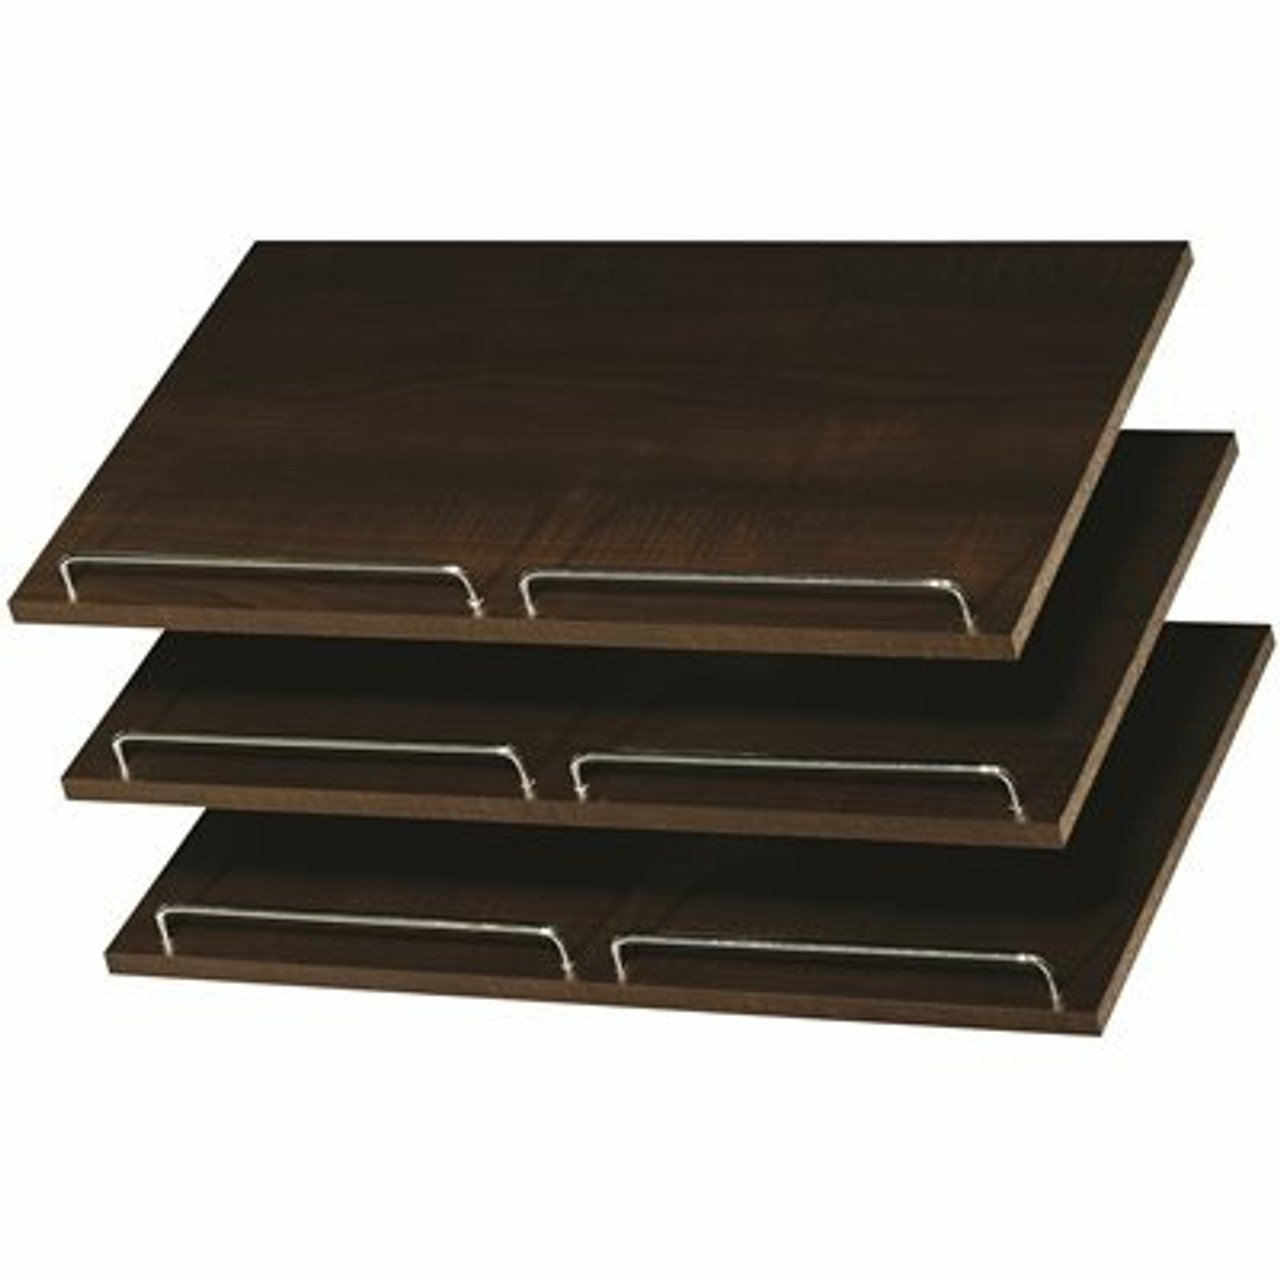 The Stow Company 24" Shoe Shelves (3 Pack) - 3580578